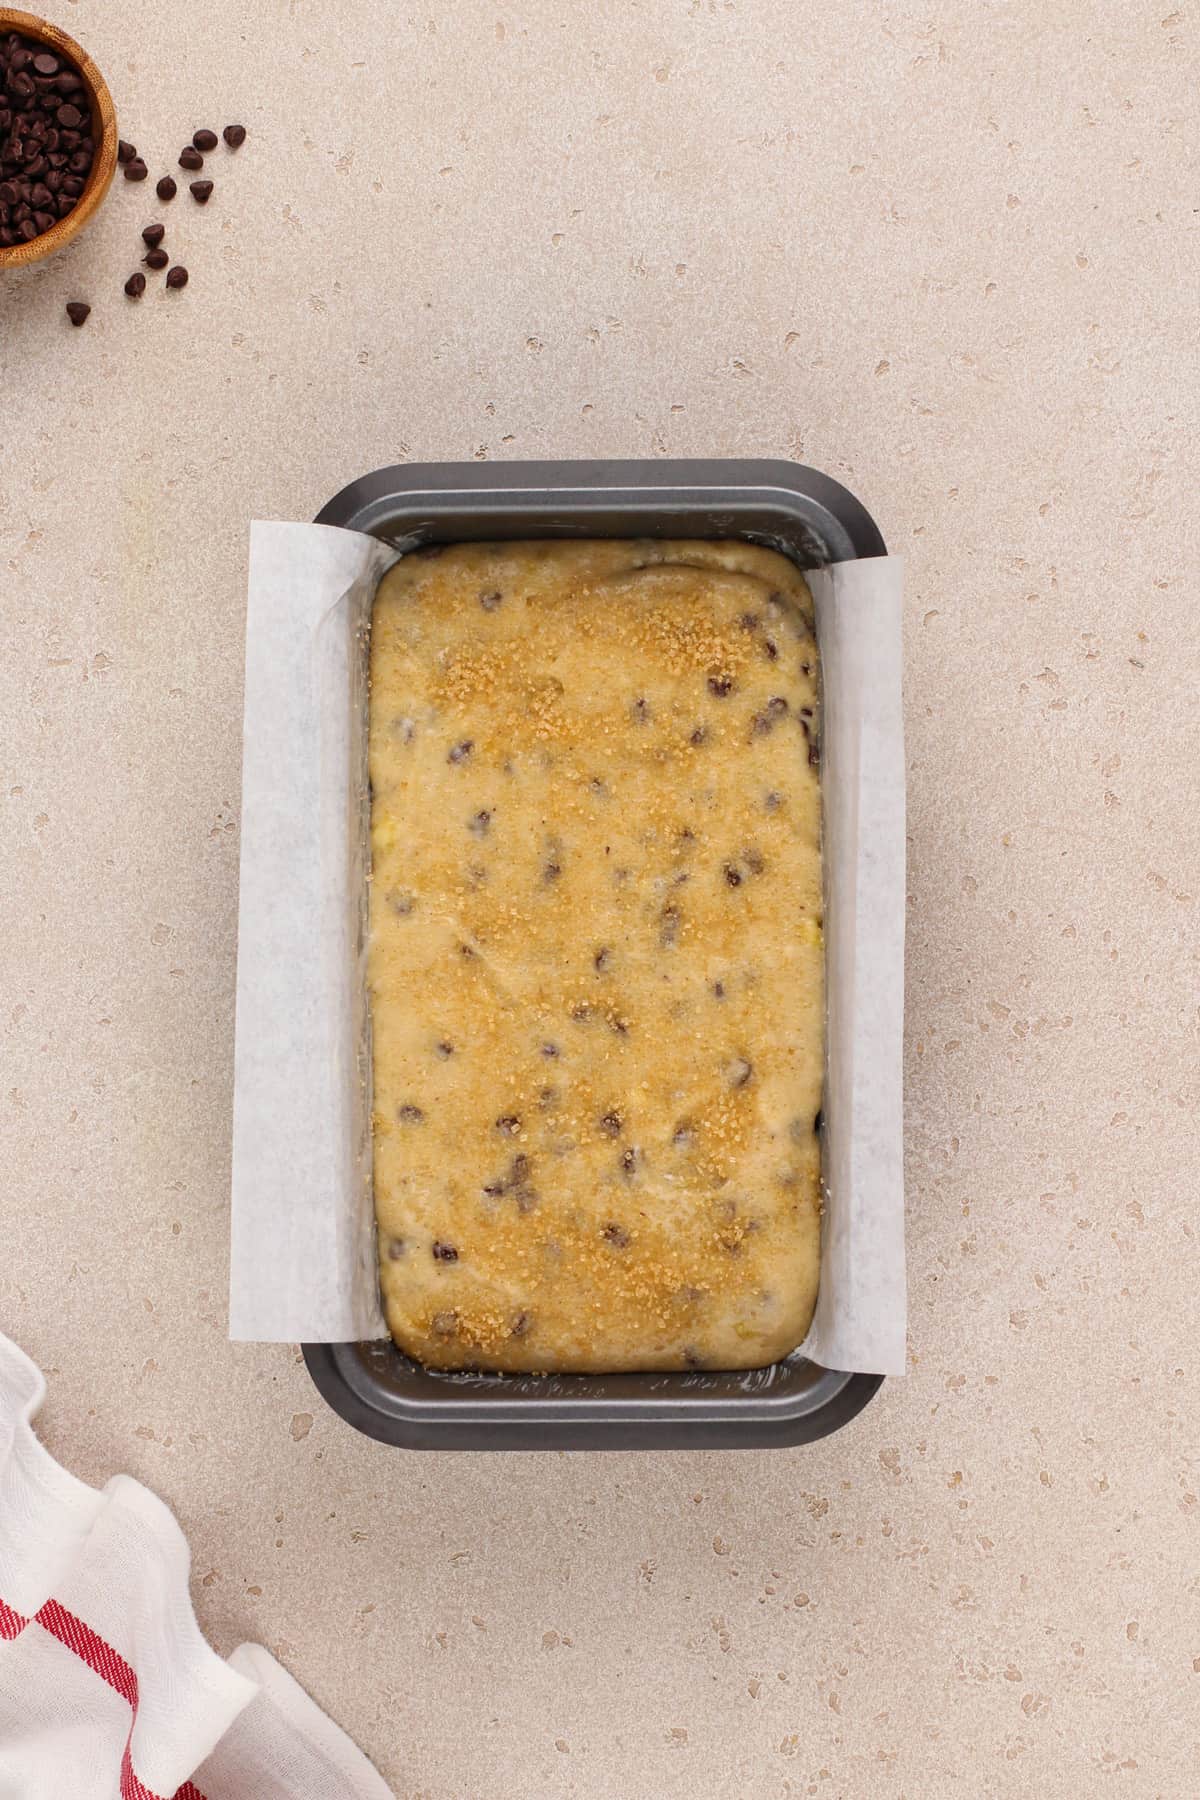 Unbaked chocolate chip banana bread in a parchment-lined loaf pan, ready to go in the oven.